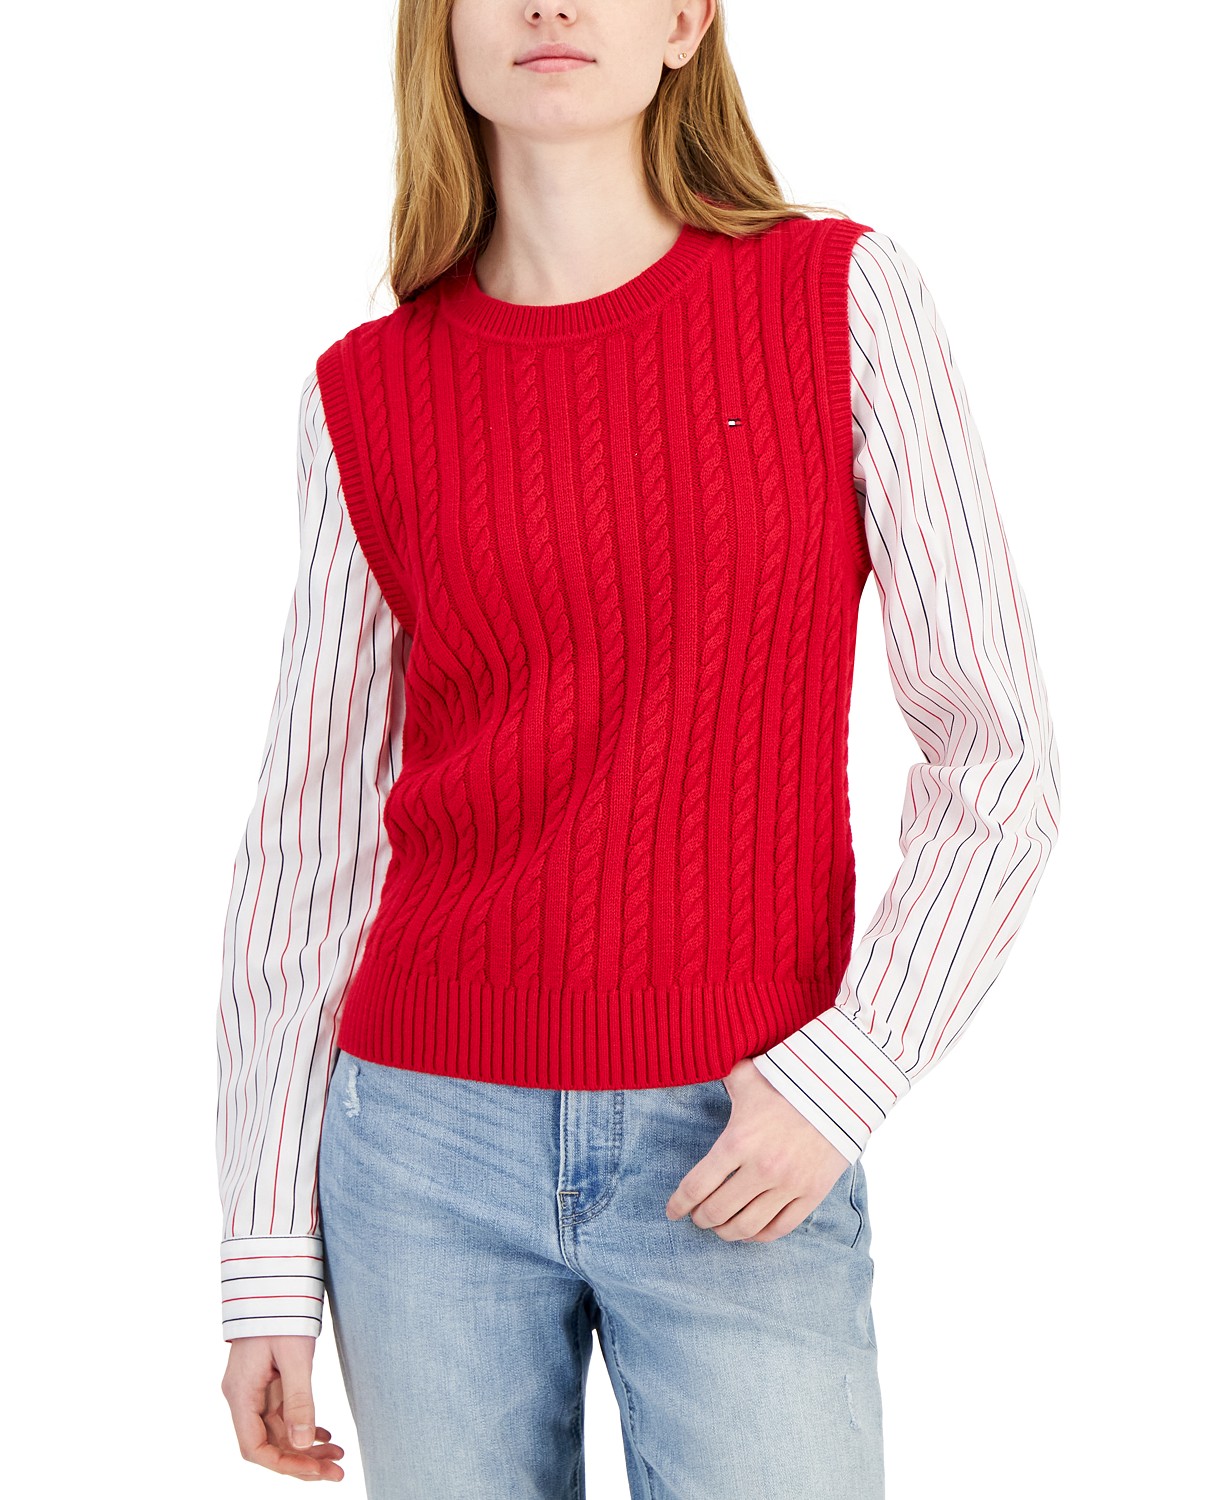 Womens Striped Layered-Look Sweater Vest